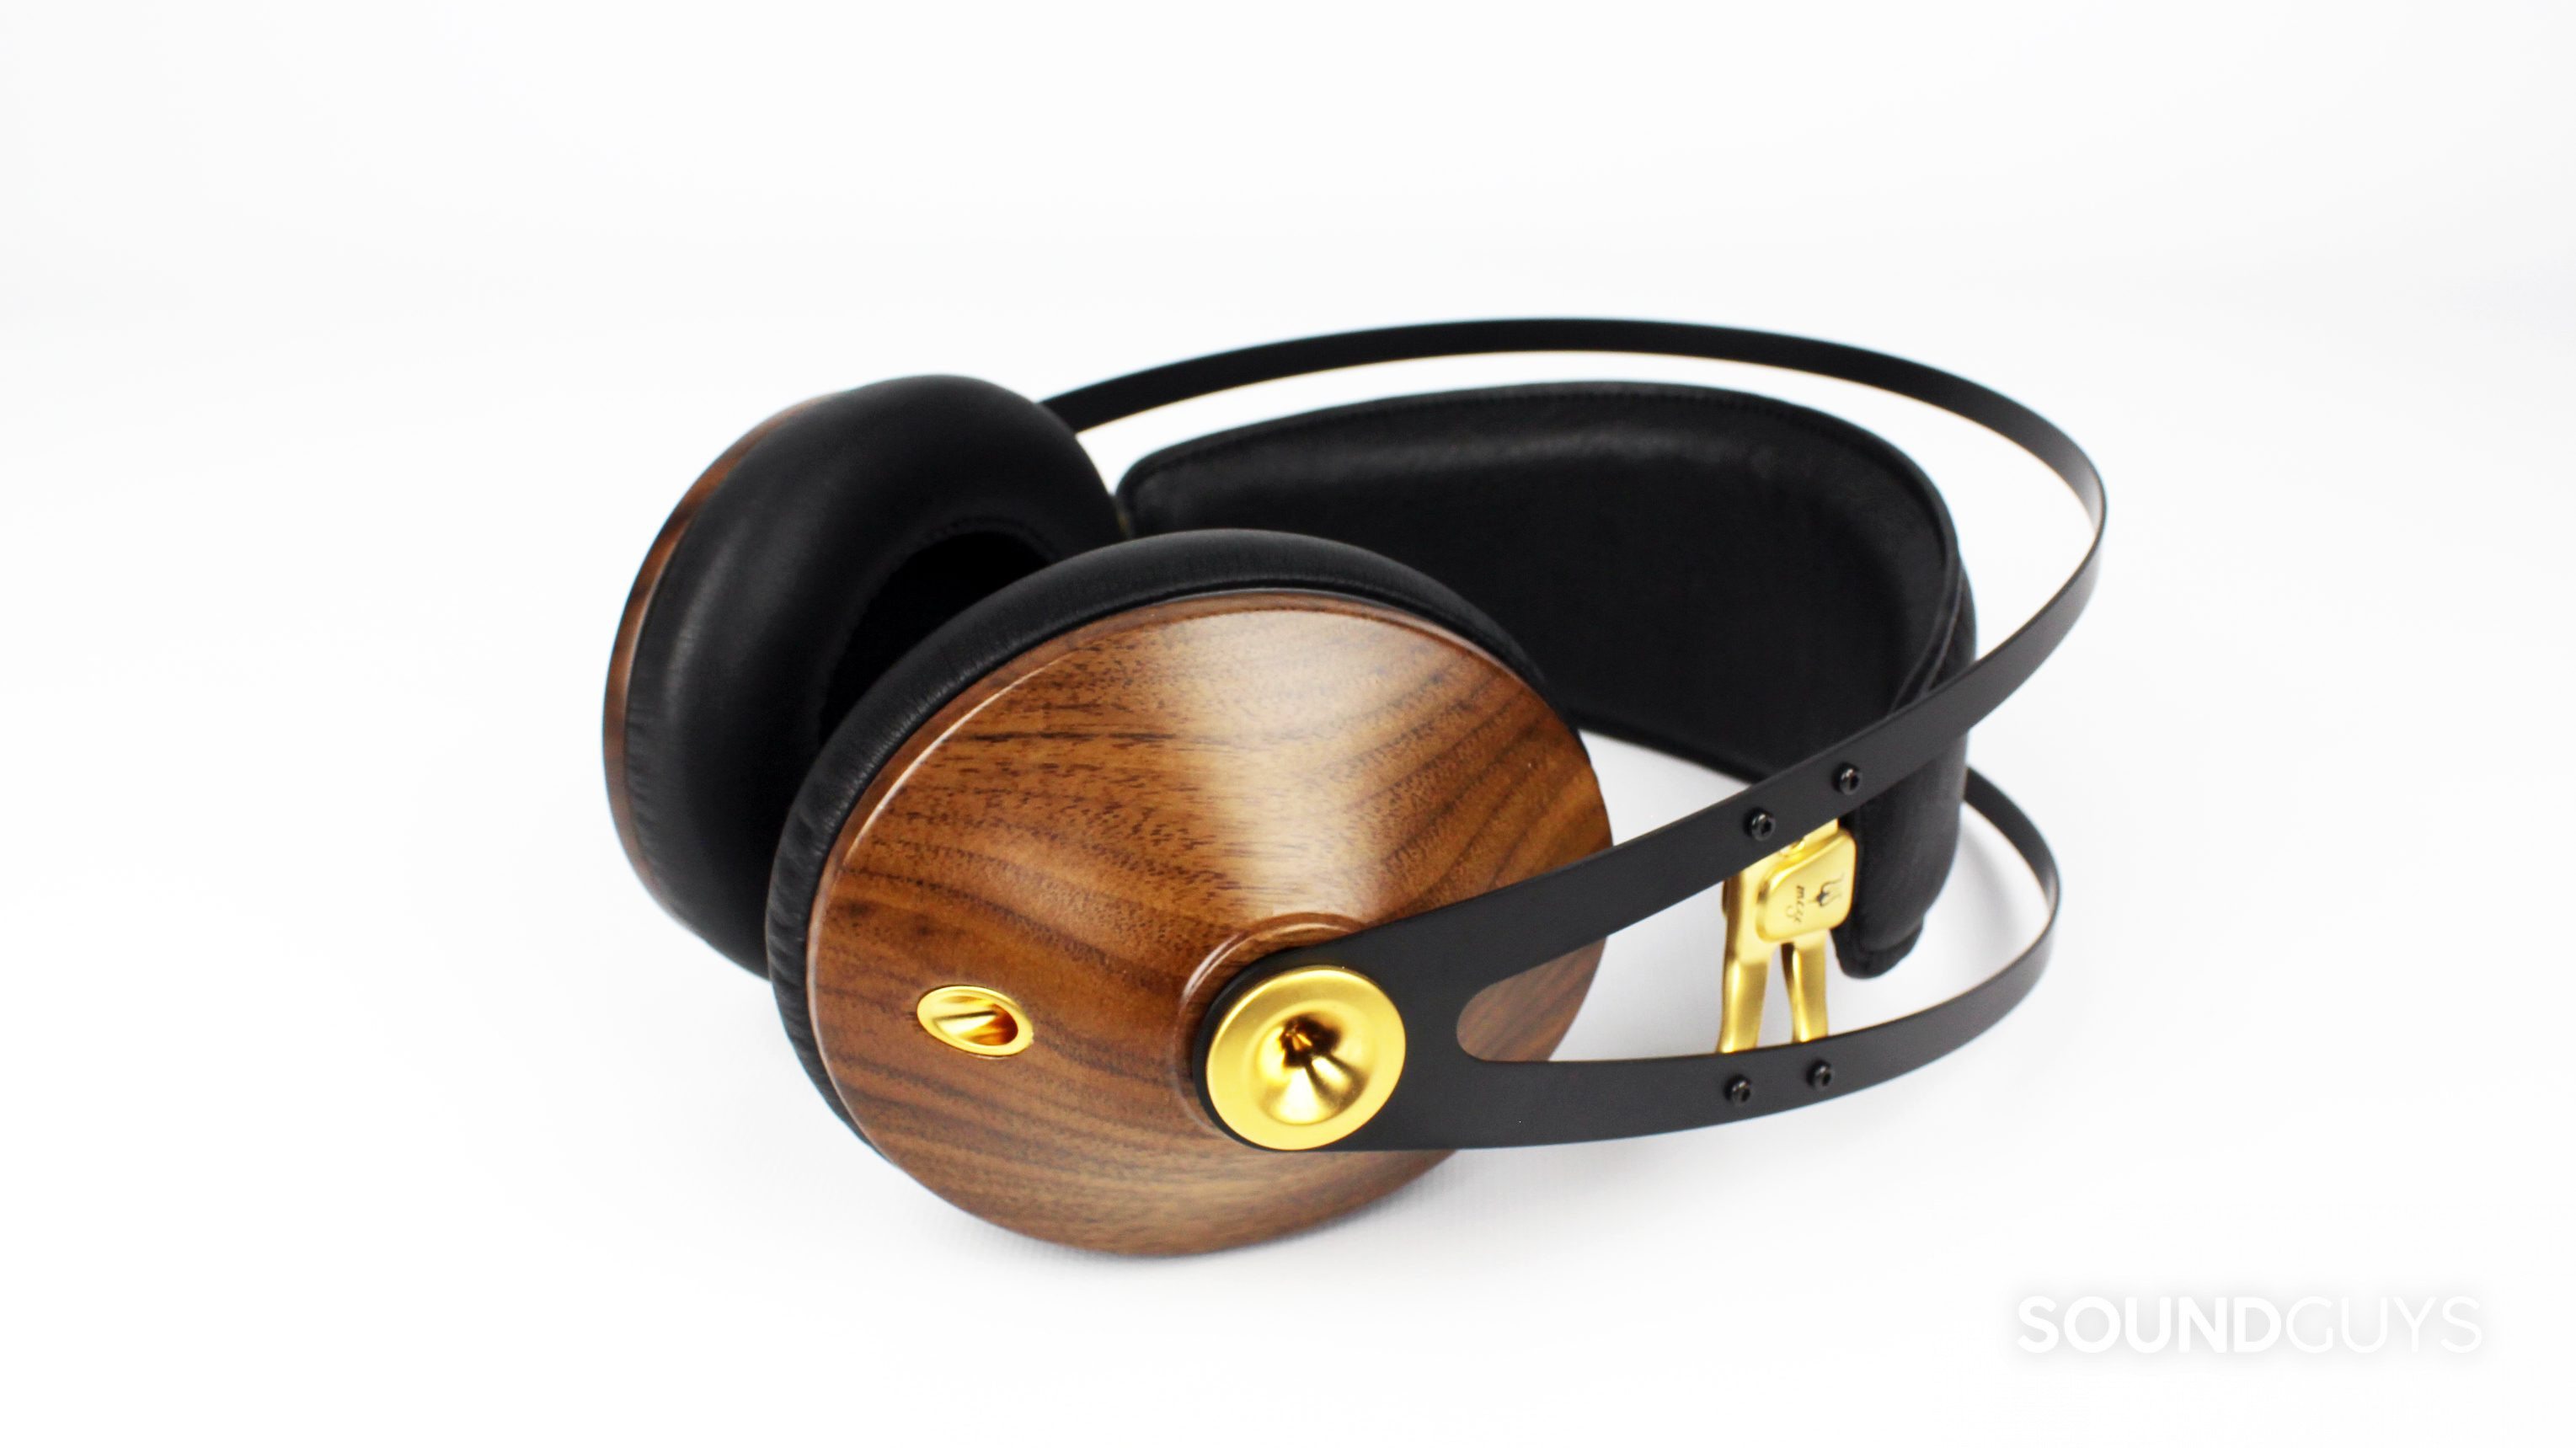 The Meze 99 Classics headphones in walnut/gold against a white backdrop.